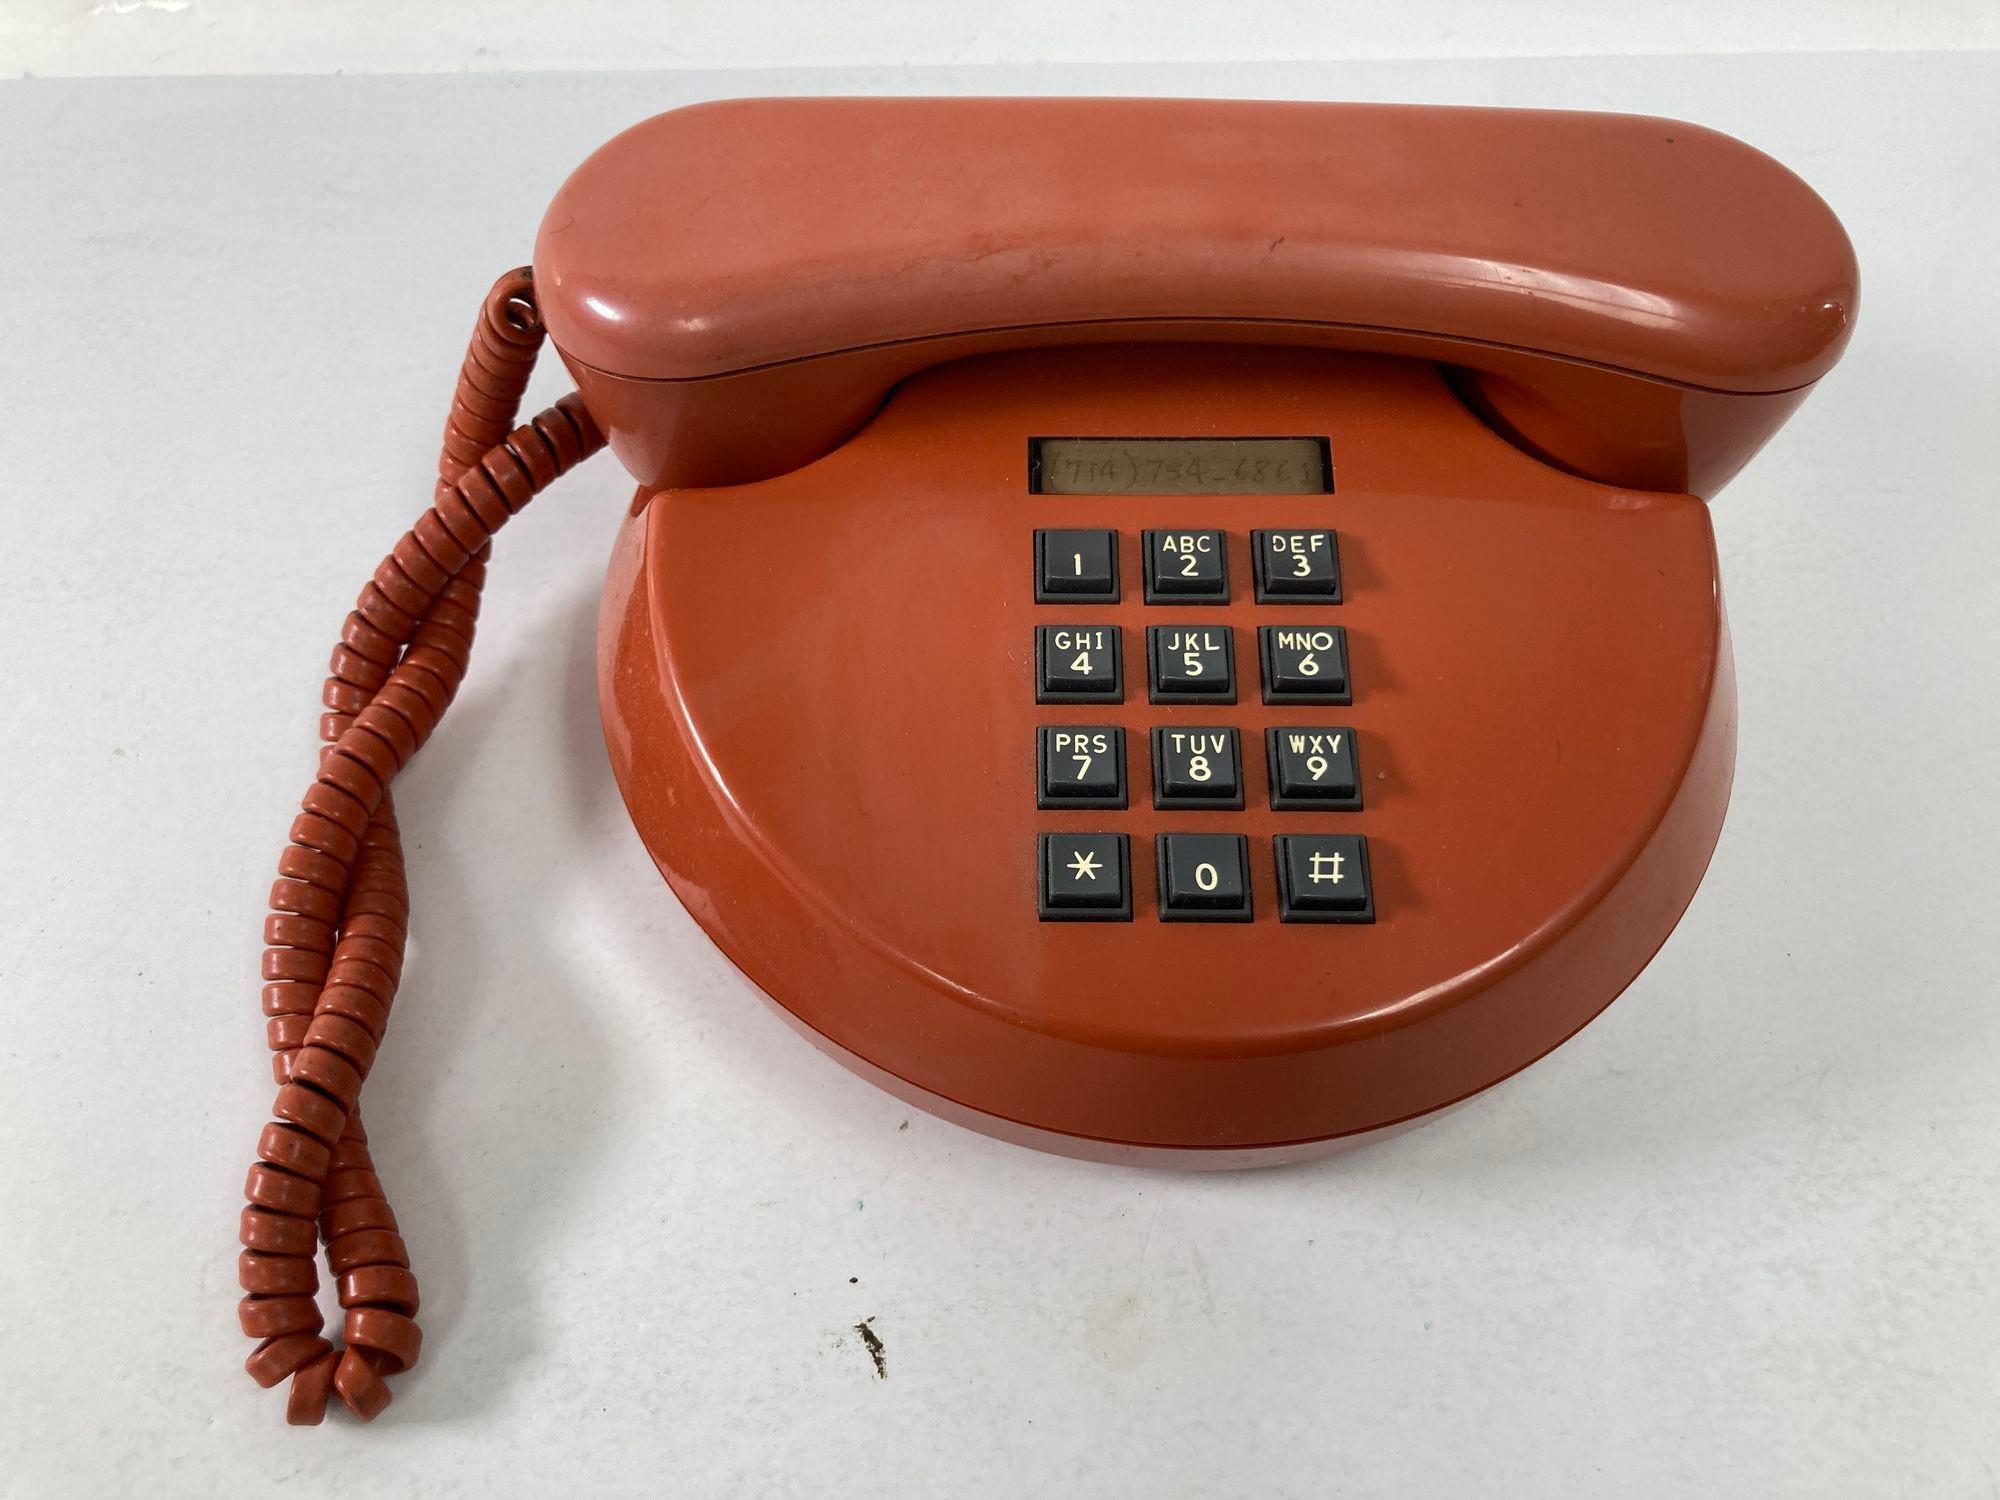 Hand-Carved Vintage Retro Push-Button Round Telephone Burnt Orange Color from the, 70s